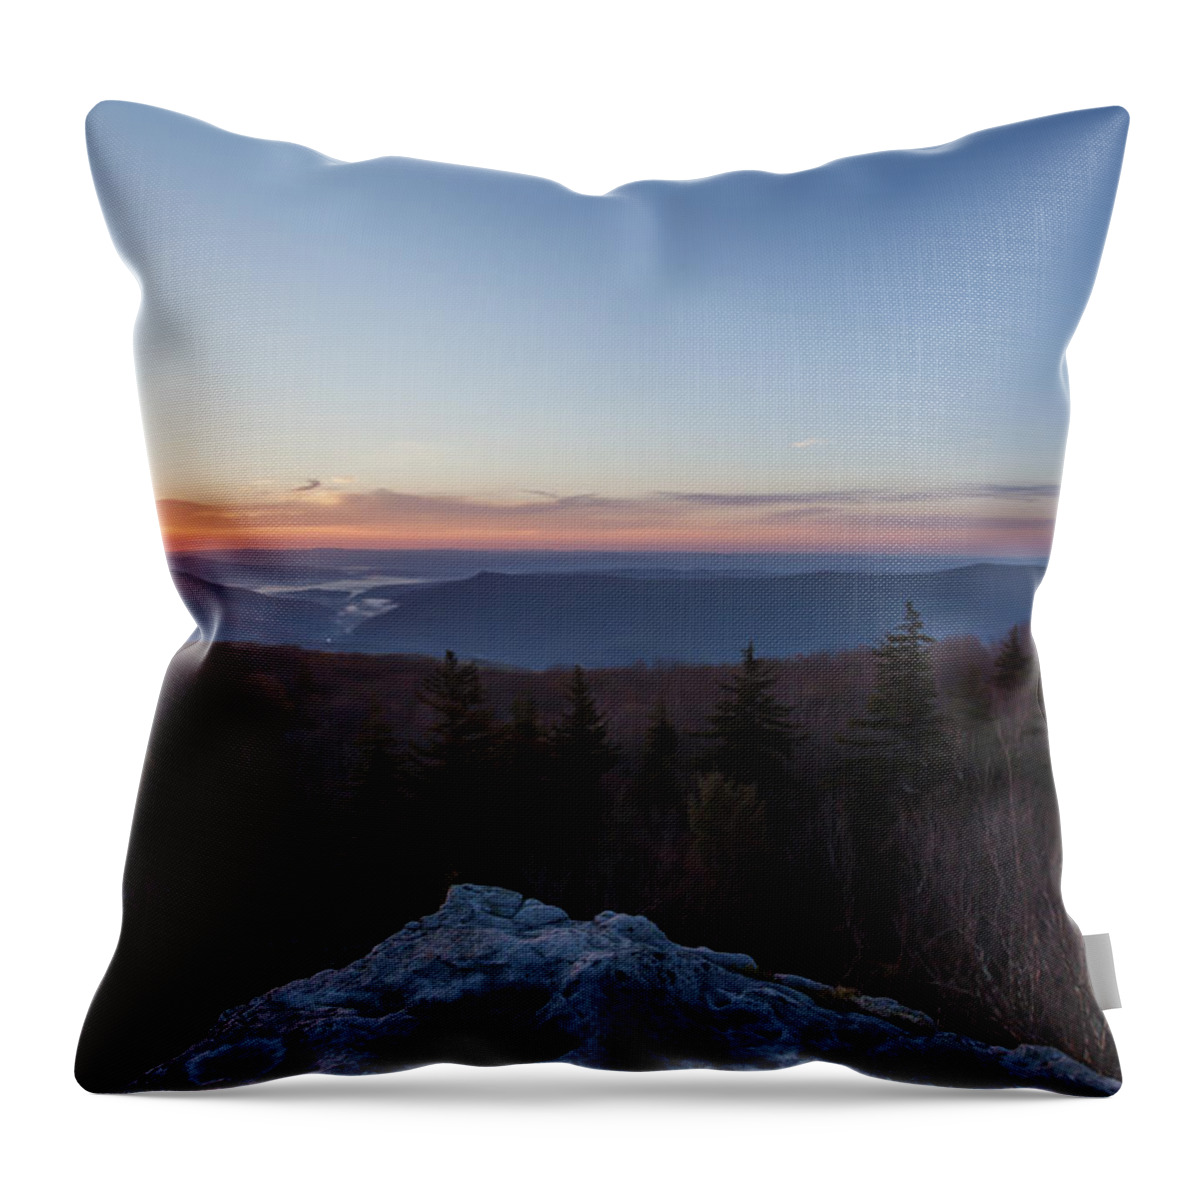 Landscapes Throw Pillow featuring the photograph West Virginia Sunrise by Amber Kresge